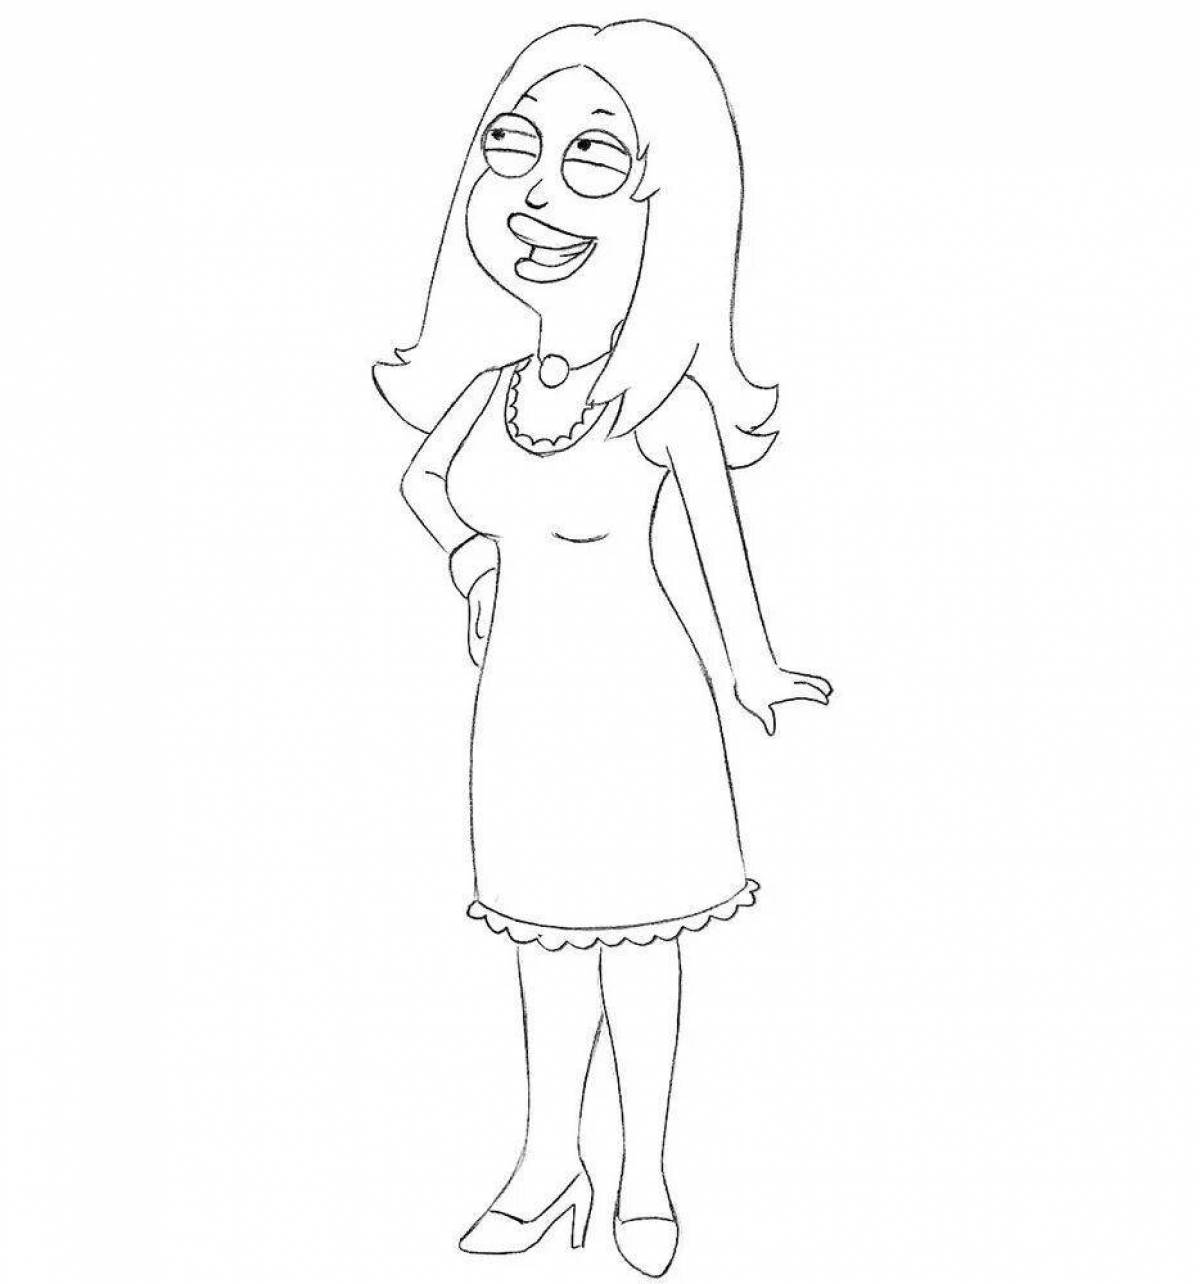 Coloring page amazing american dad